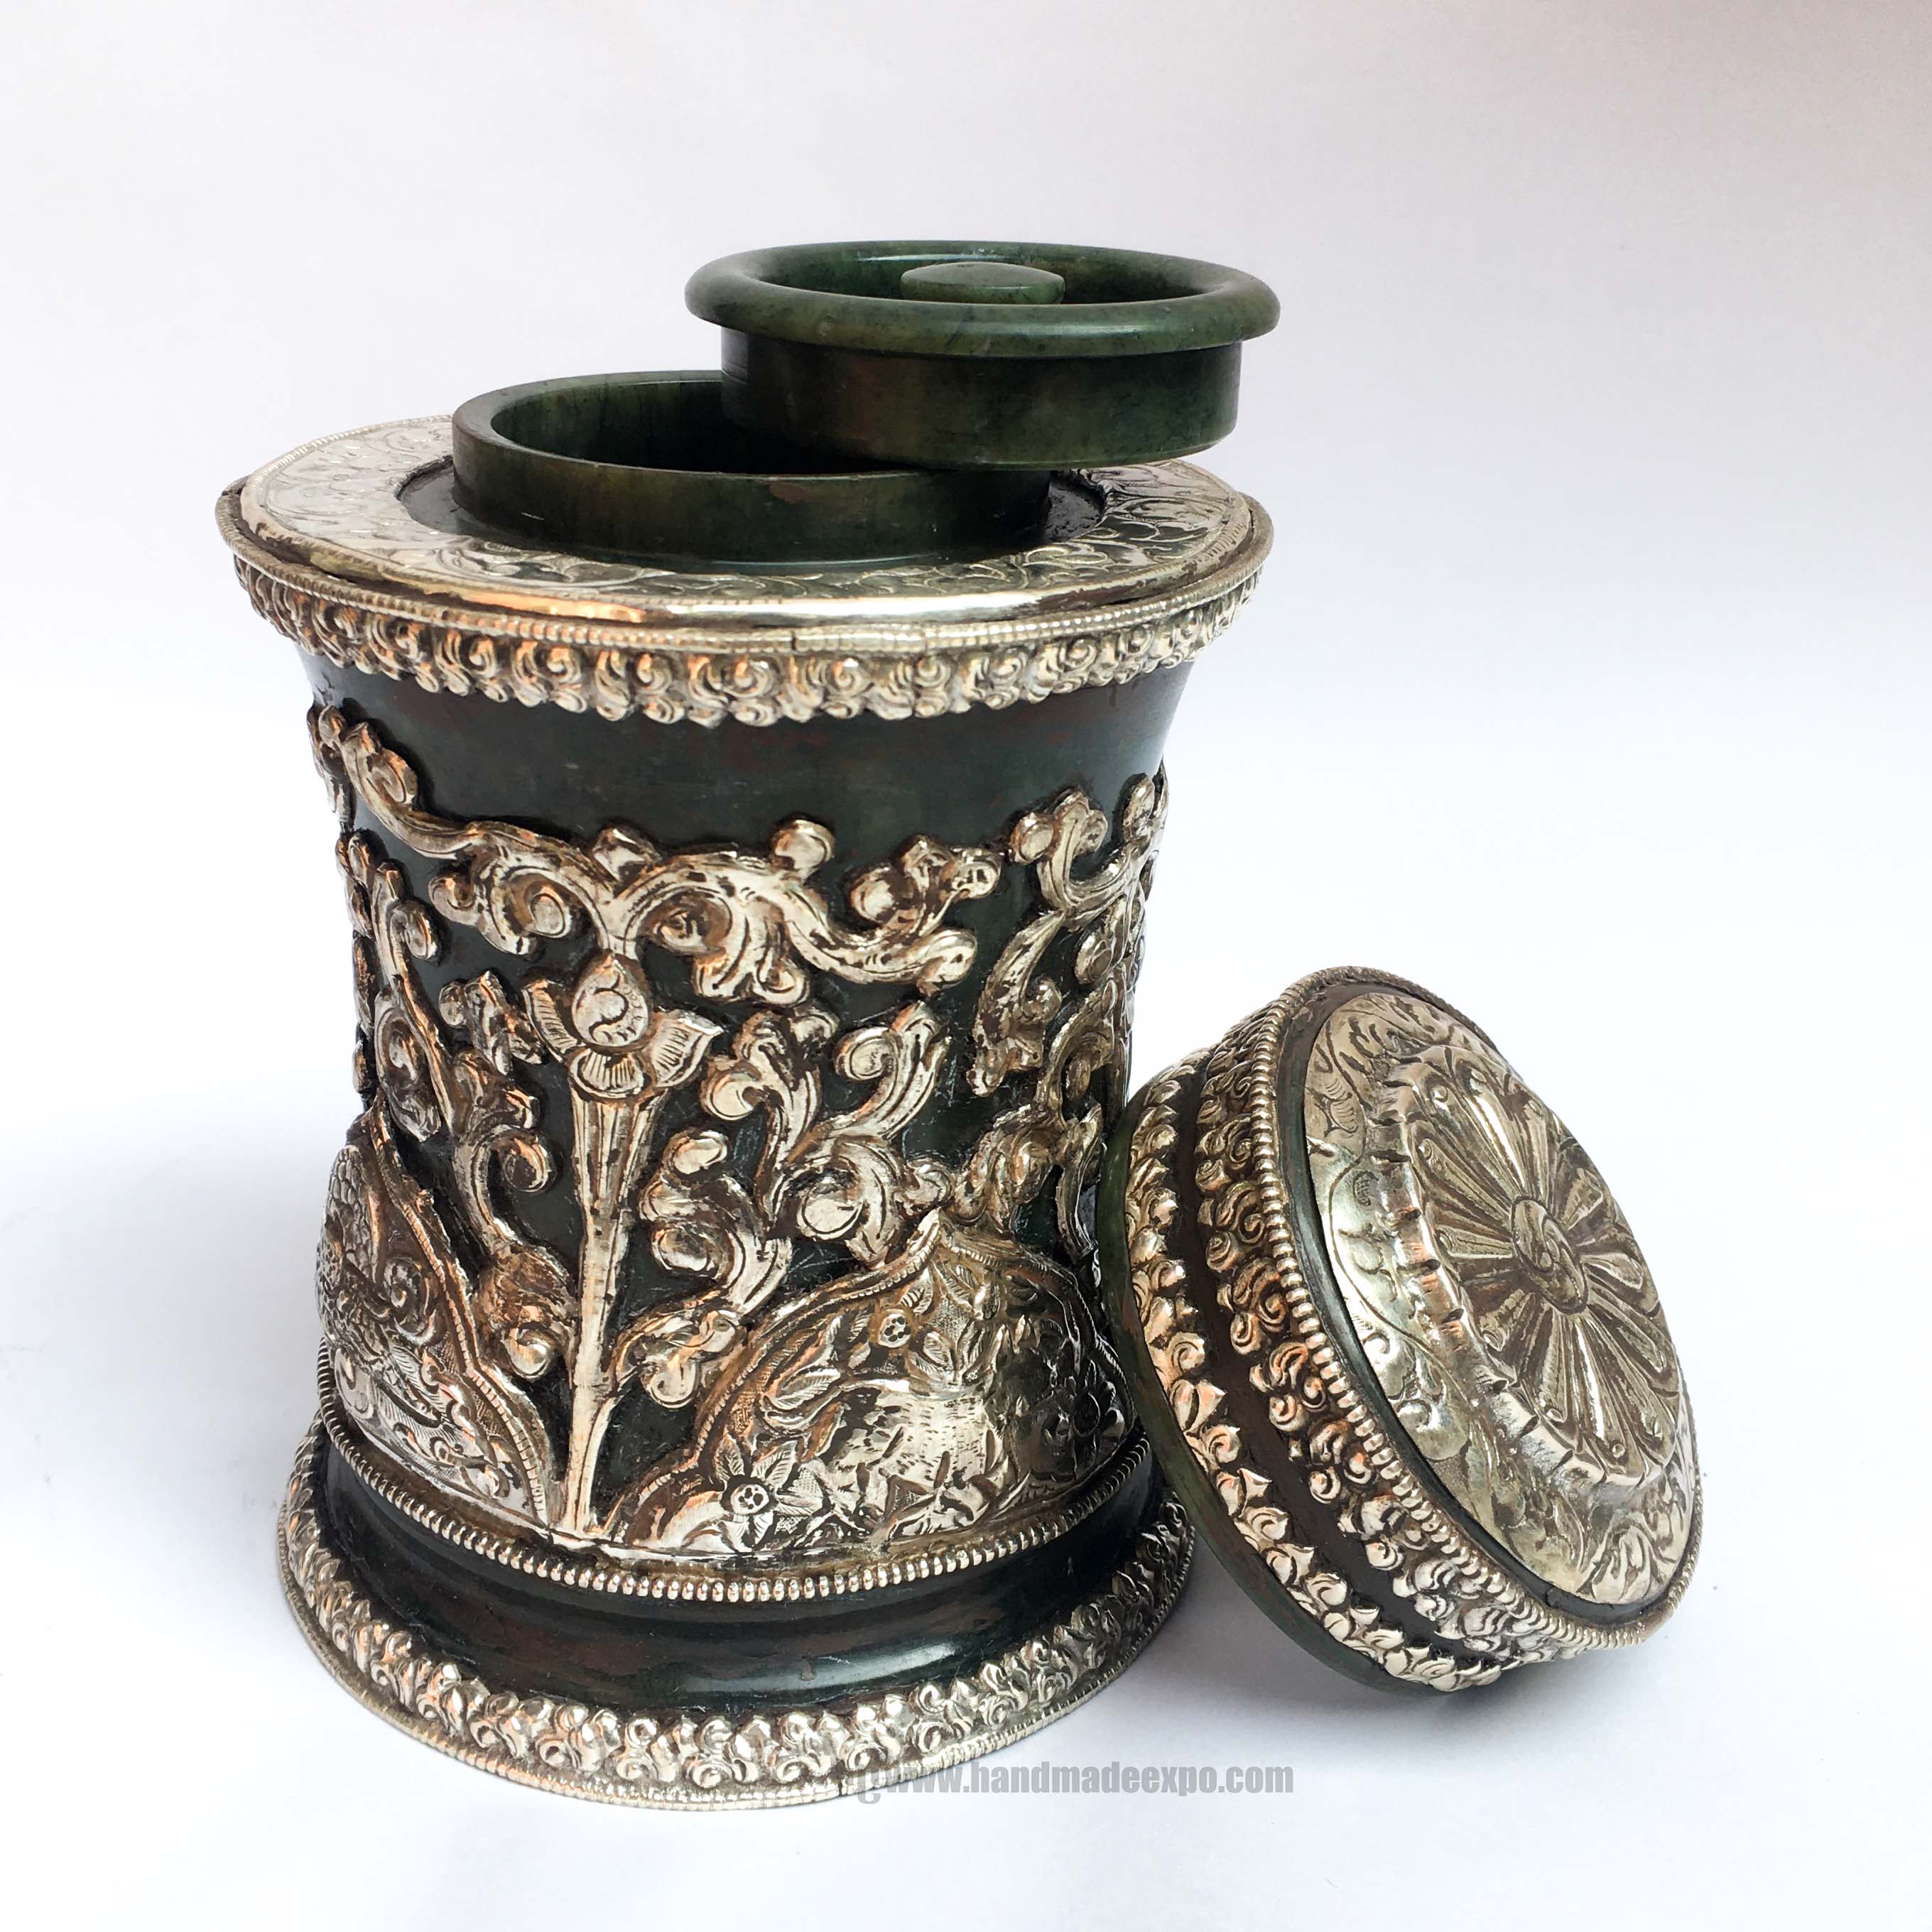 Tibetan Tea And Water Offering Vessel, Black Color, With 16 Tola Silver And Metal Siku Design, Offering Tea